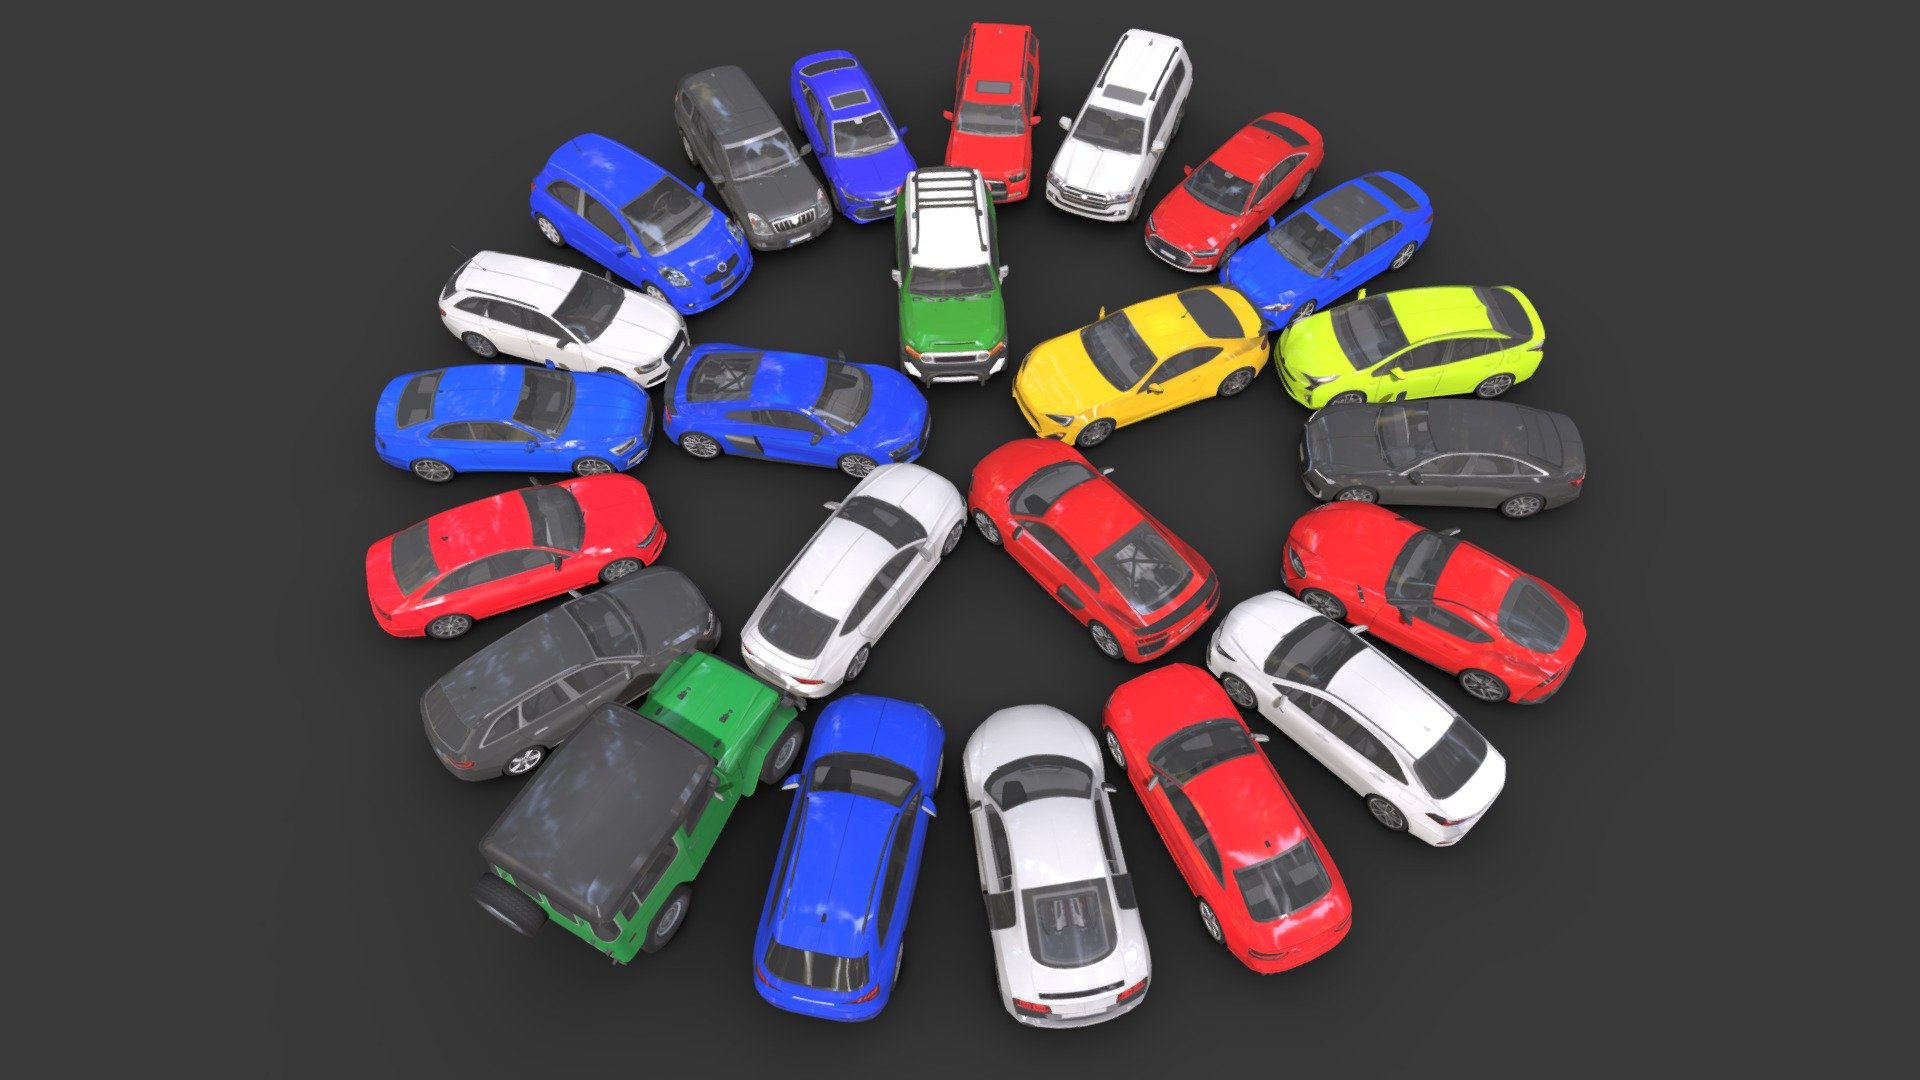 *Cars Collection 24 (Low-Poly)

*You can use all of these vehicles in your games.

*the inside of these models are designed simply so it is low_poly and it can be used for any game.

*Low poly

*24 models

*Average poly count:15/000 tris.

Textures size : 2048 * 2048 (BMP)_10241024(bmp)_512*512(bmp)

*Textures High Quality

- - - - - - - - - - - - You Can make 3d models by yourself - - - - - - - - - - - -
- - - - - - - - - - - - - - but spent time will cost dearer - - - - - - - - - - - - -
 - Cars Collection 24 (Low-Poly) - Buy Royalty Free 3D model by Sidra (@Sidramax) 3d model